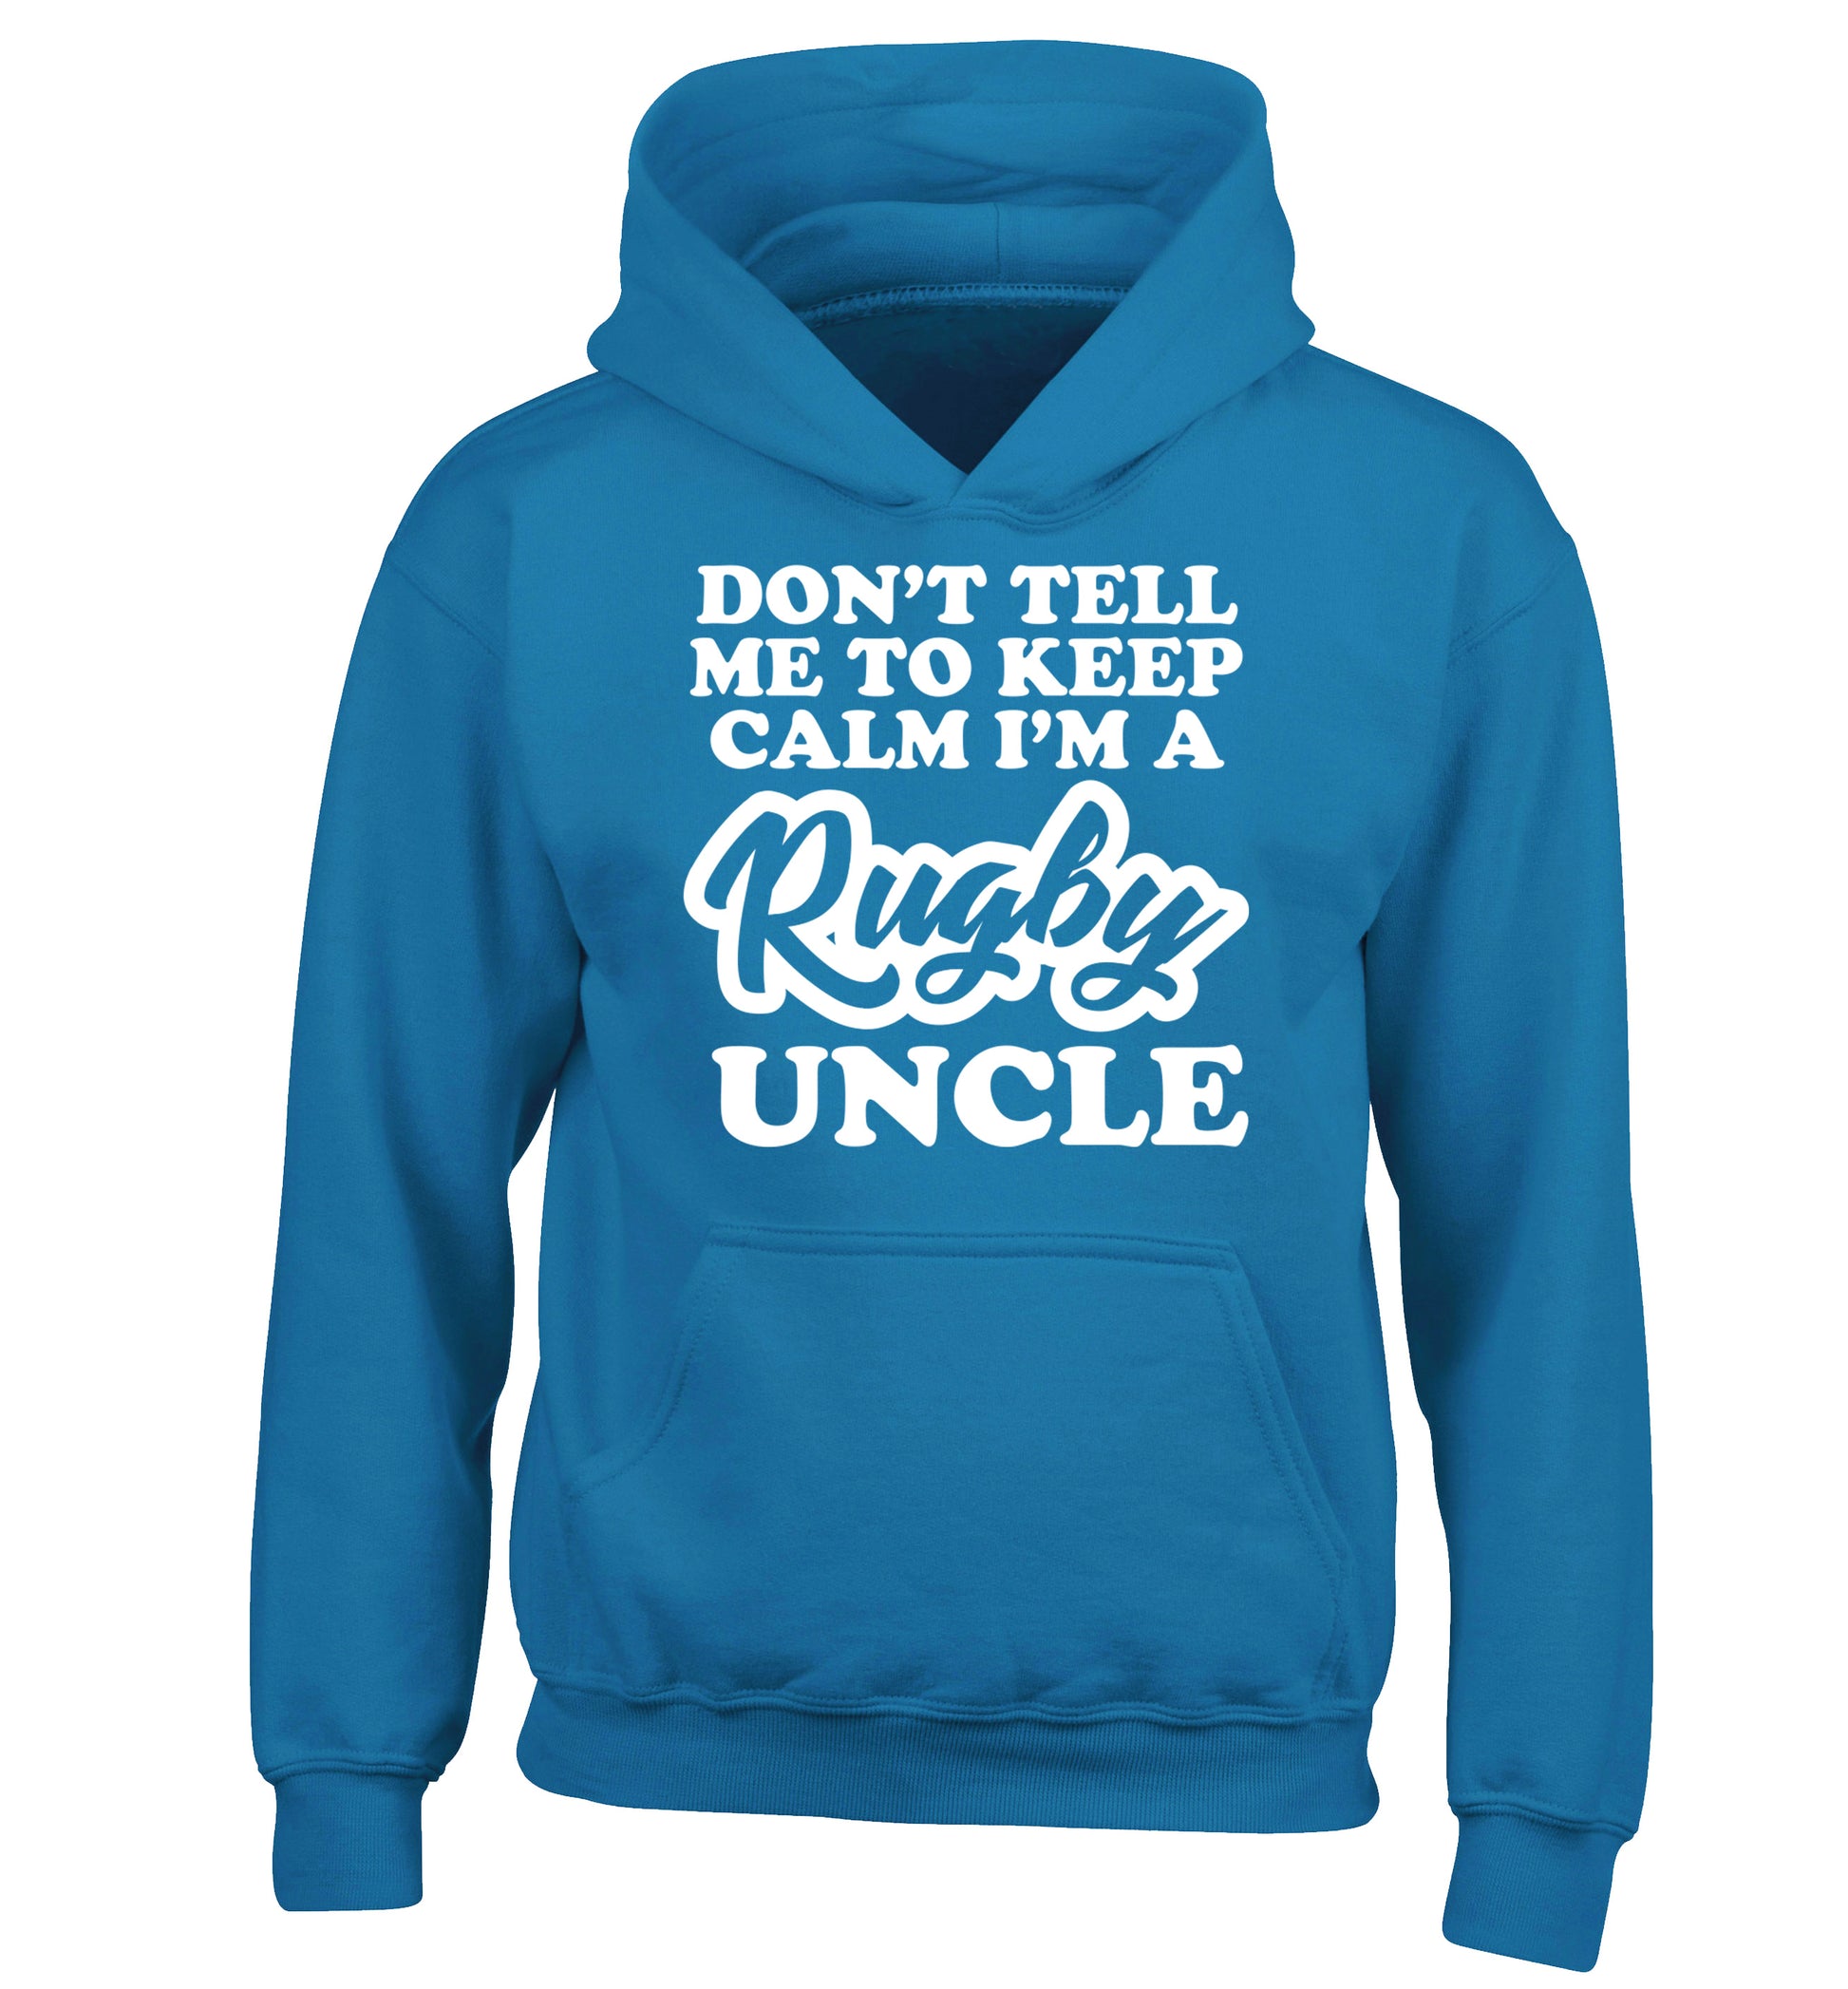 Don't tell me to keep calm I'm a rugby uncle children's blue hoodie 12-13 Years